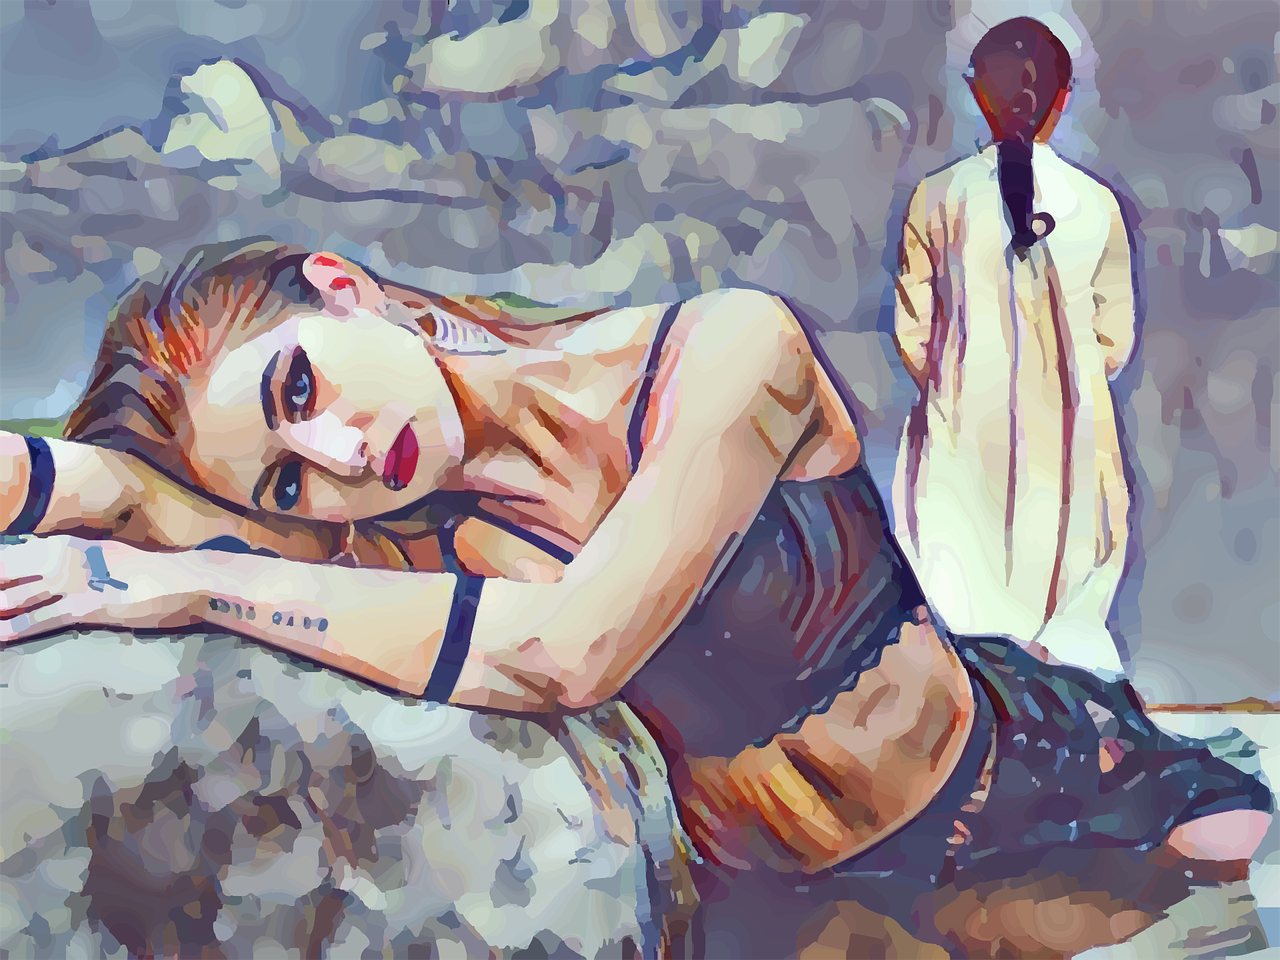 a painting of a woman laying on a rock, a digital painting, digital art, looks a blend of grimes, fashion illustration, oil paint style, a painting of two people